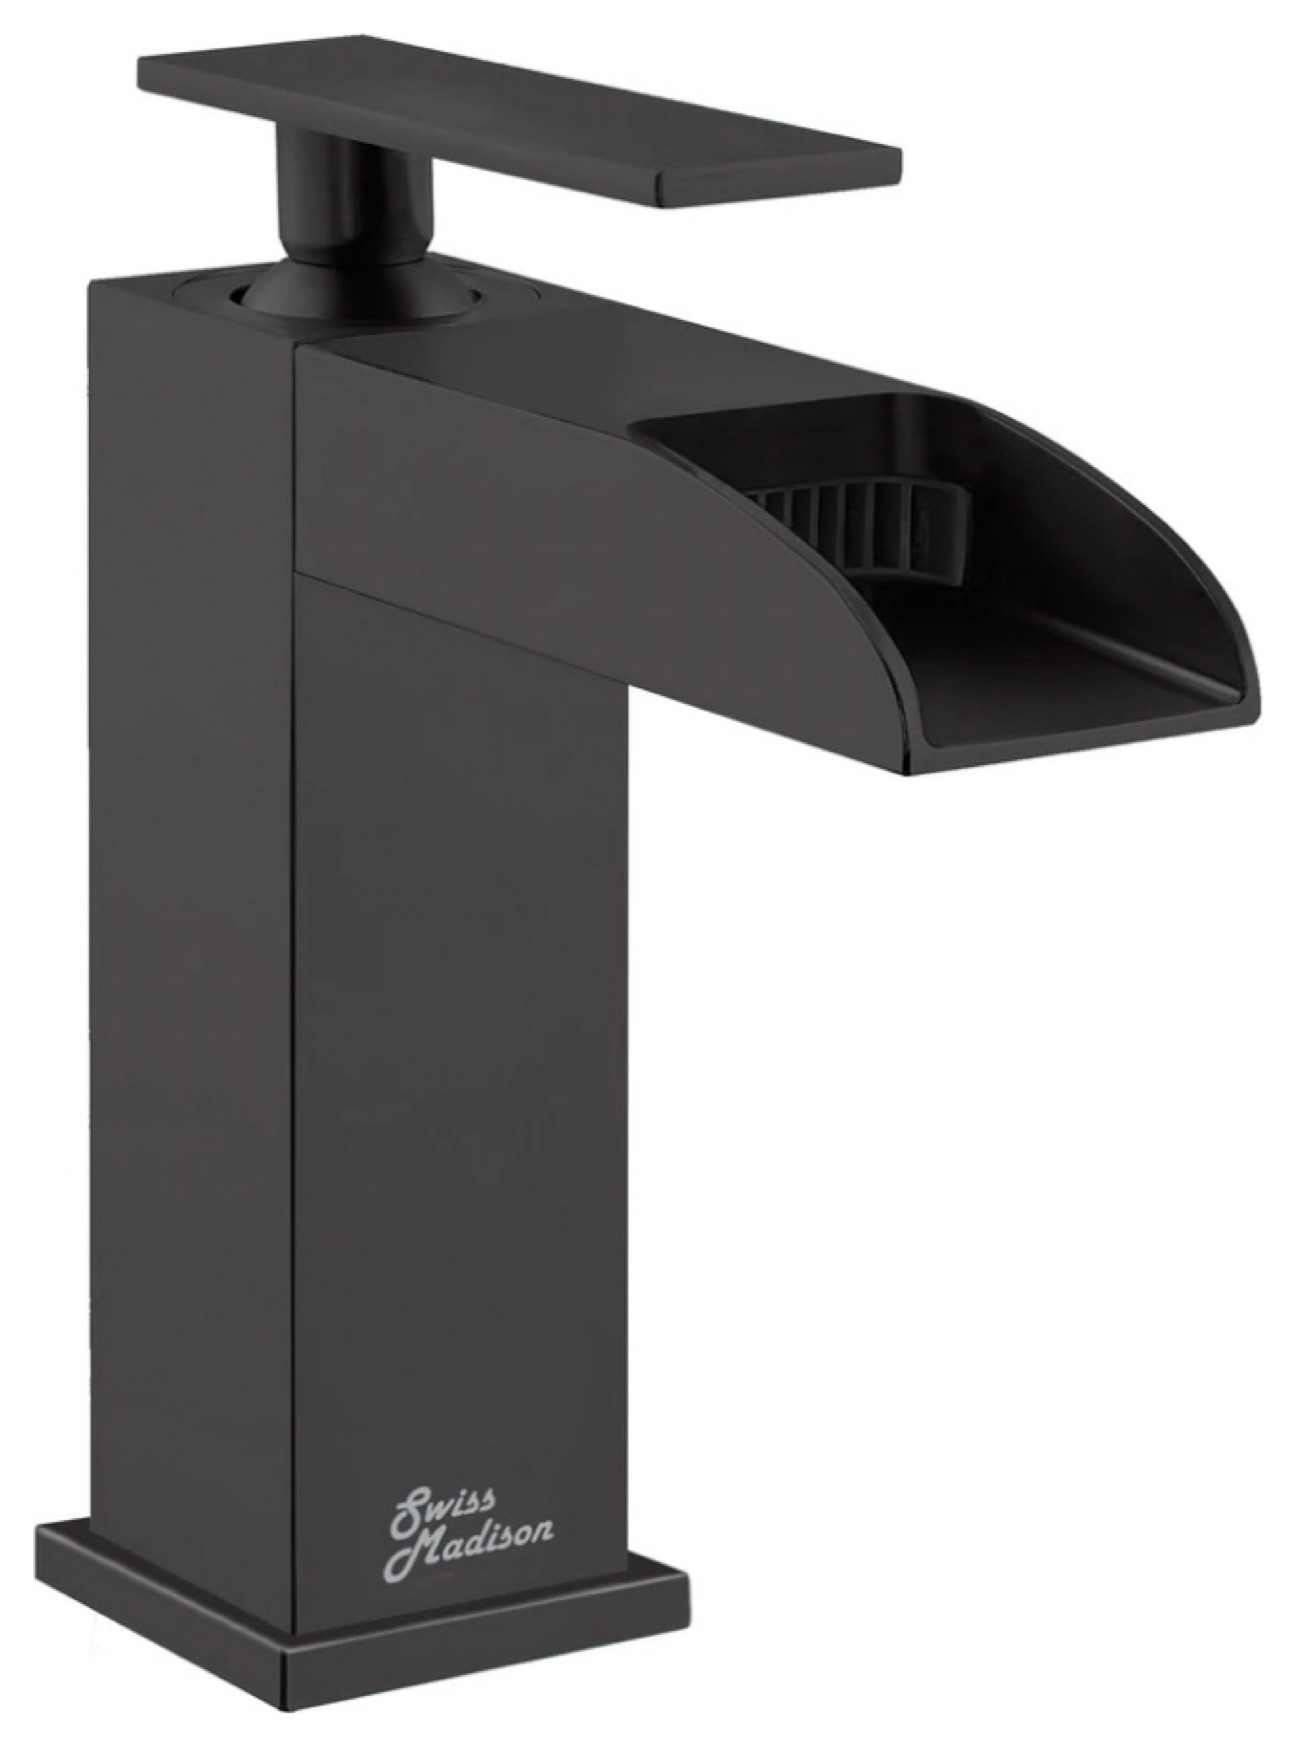 Concorde Single Hole, Single-Handle, Waterfall Basin Faucet, In Black. Finishes: Brushed Nickel, Brushed Gold, Chrome, & Oil Rubbed Bronze (SM-BF50MB)